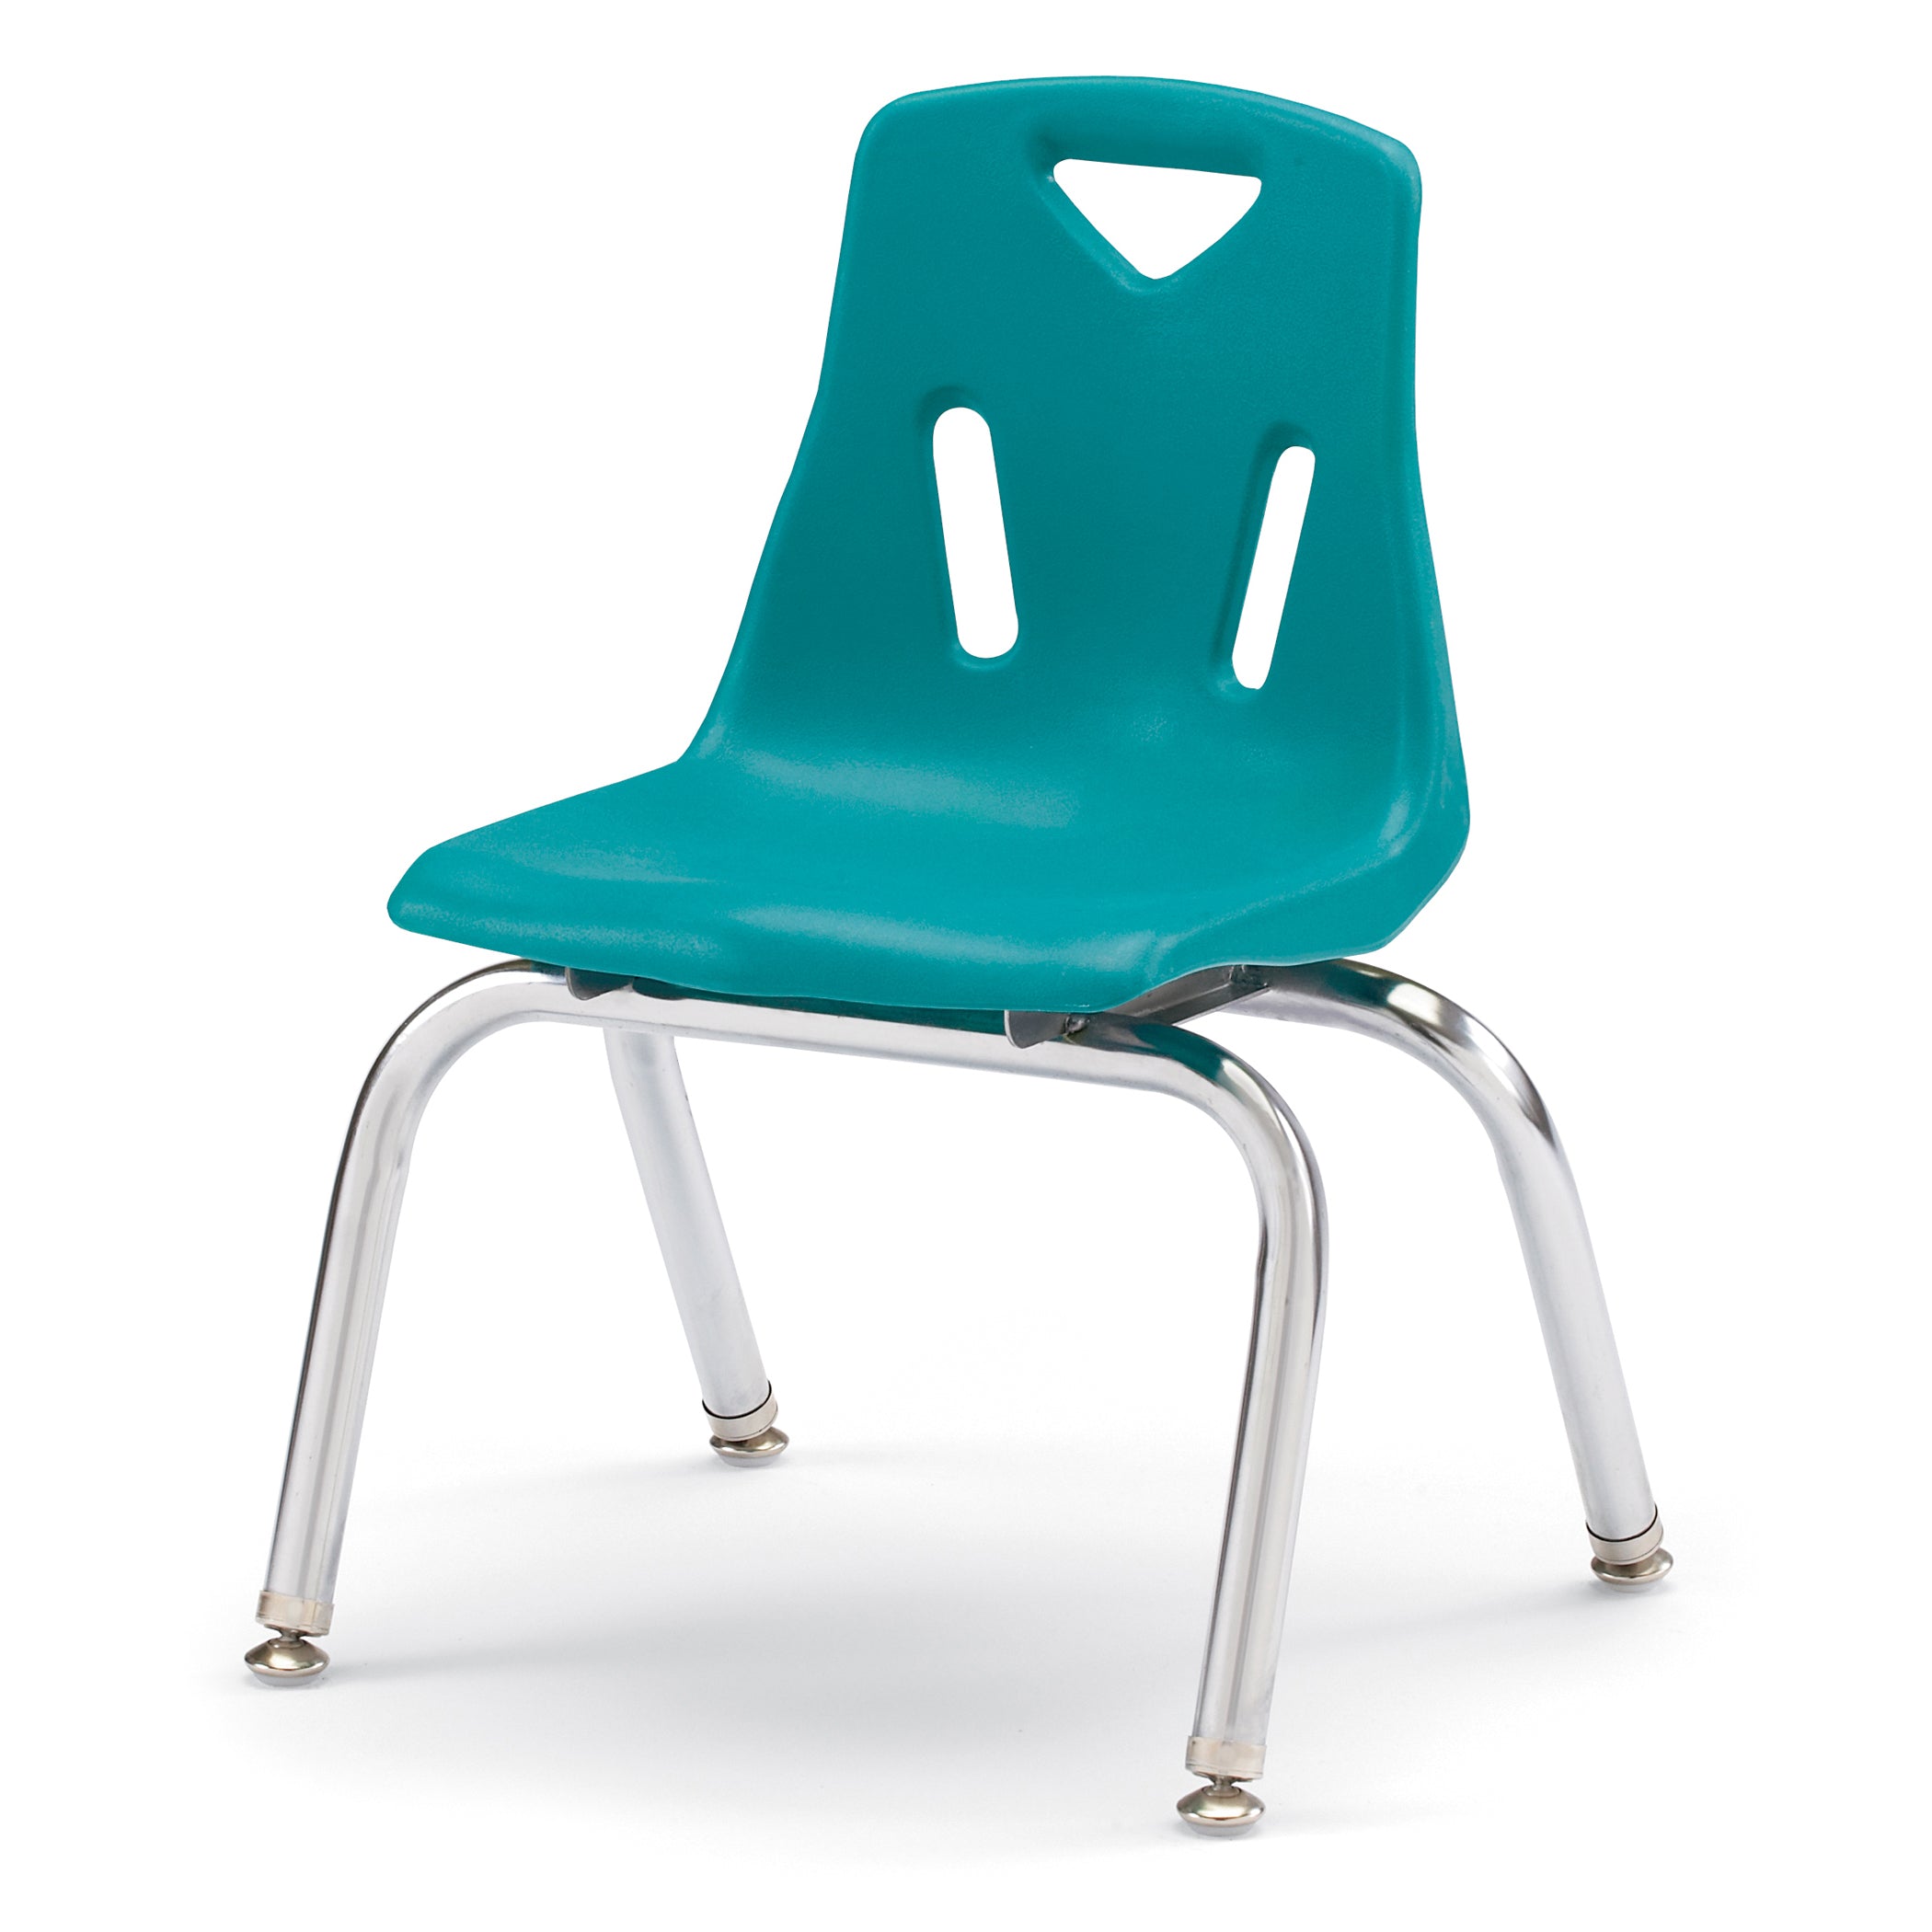 8142JC6005, Berries Stacking Chairs with Chrome-Plated Legs - 12" Ht - Set of 6 - Teal